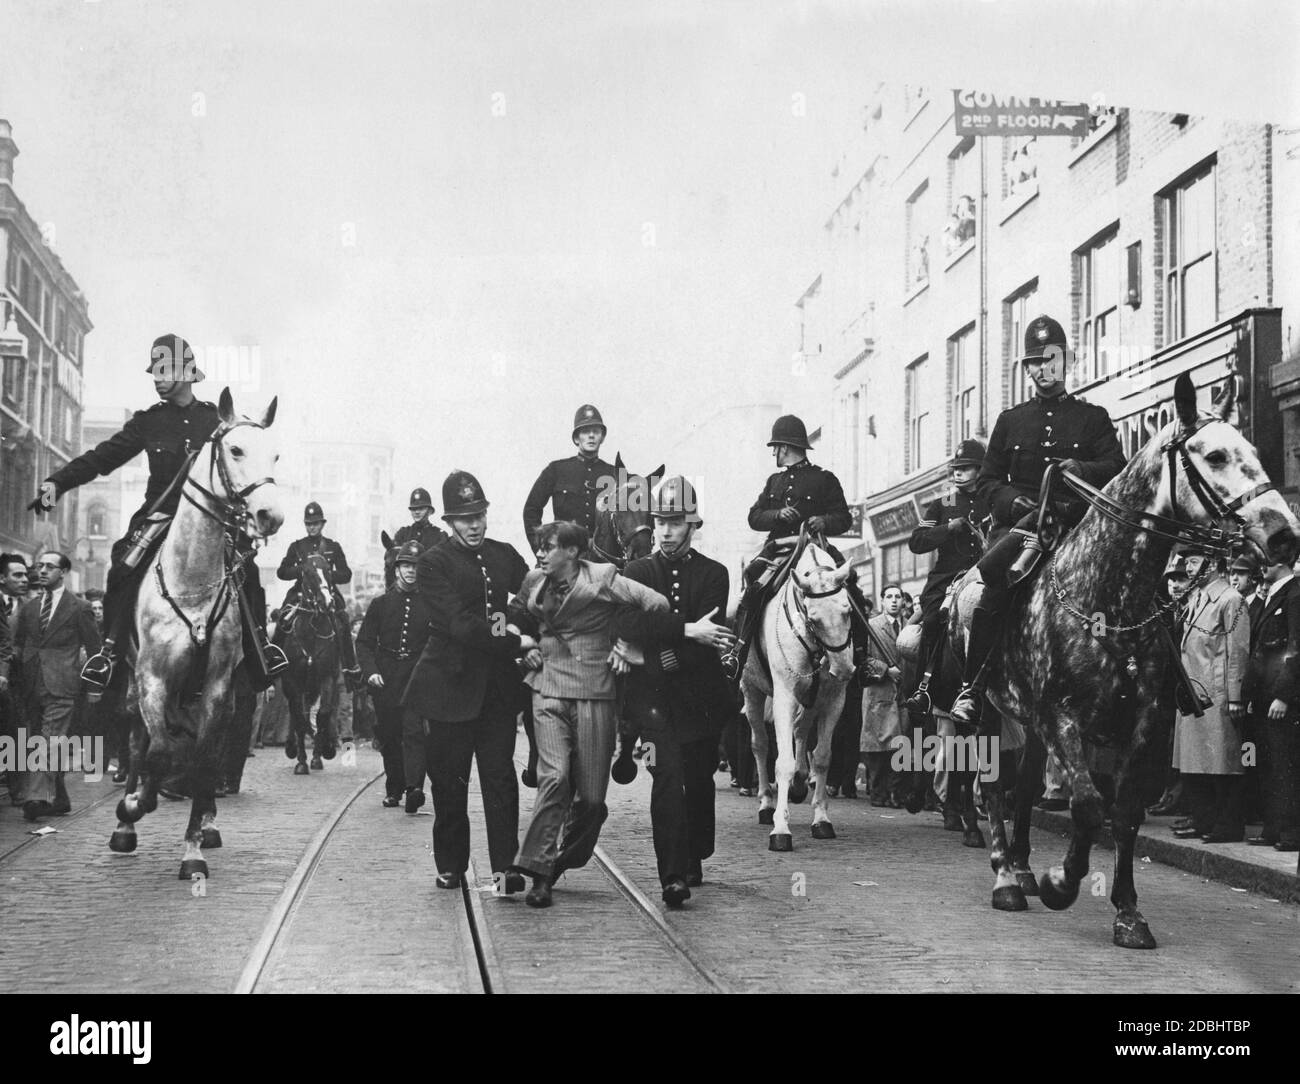 'Police officers are taking an arrested demonstrator away. On the occasion of a march of the ''British Union of Fascists'' (BUF), numerous anti-fascist demonstrators had gathered in London and protested against the march.' Stock Photo